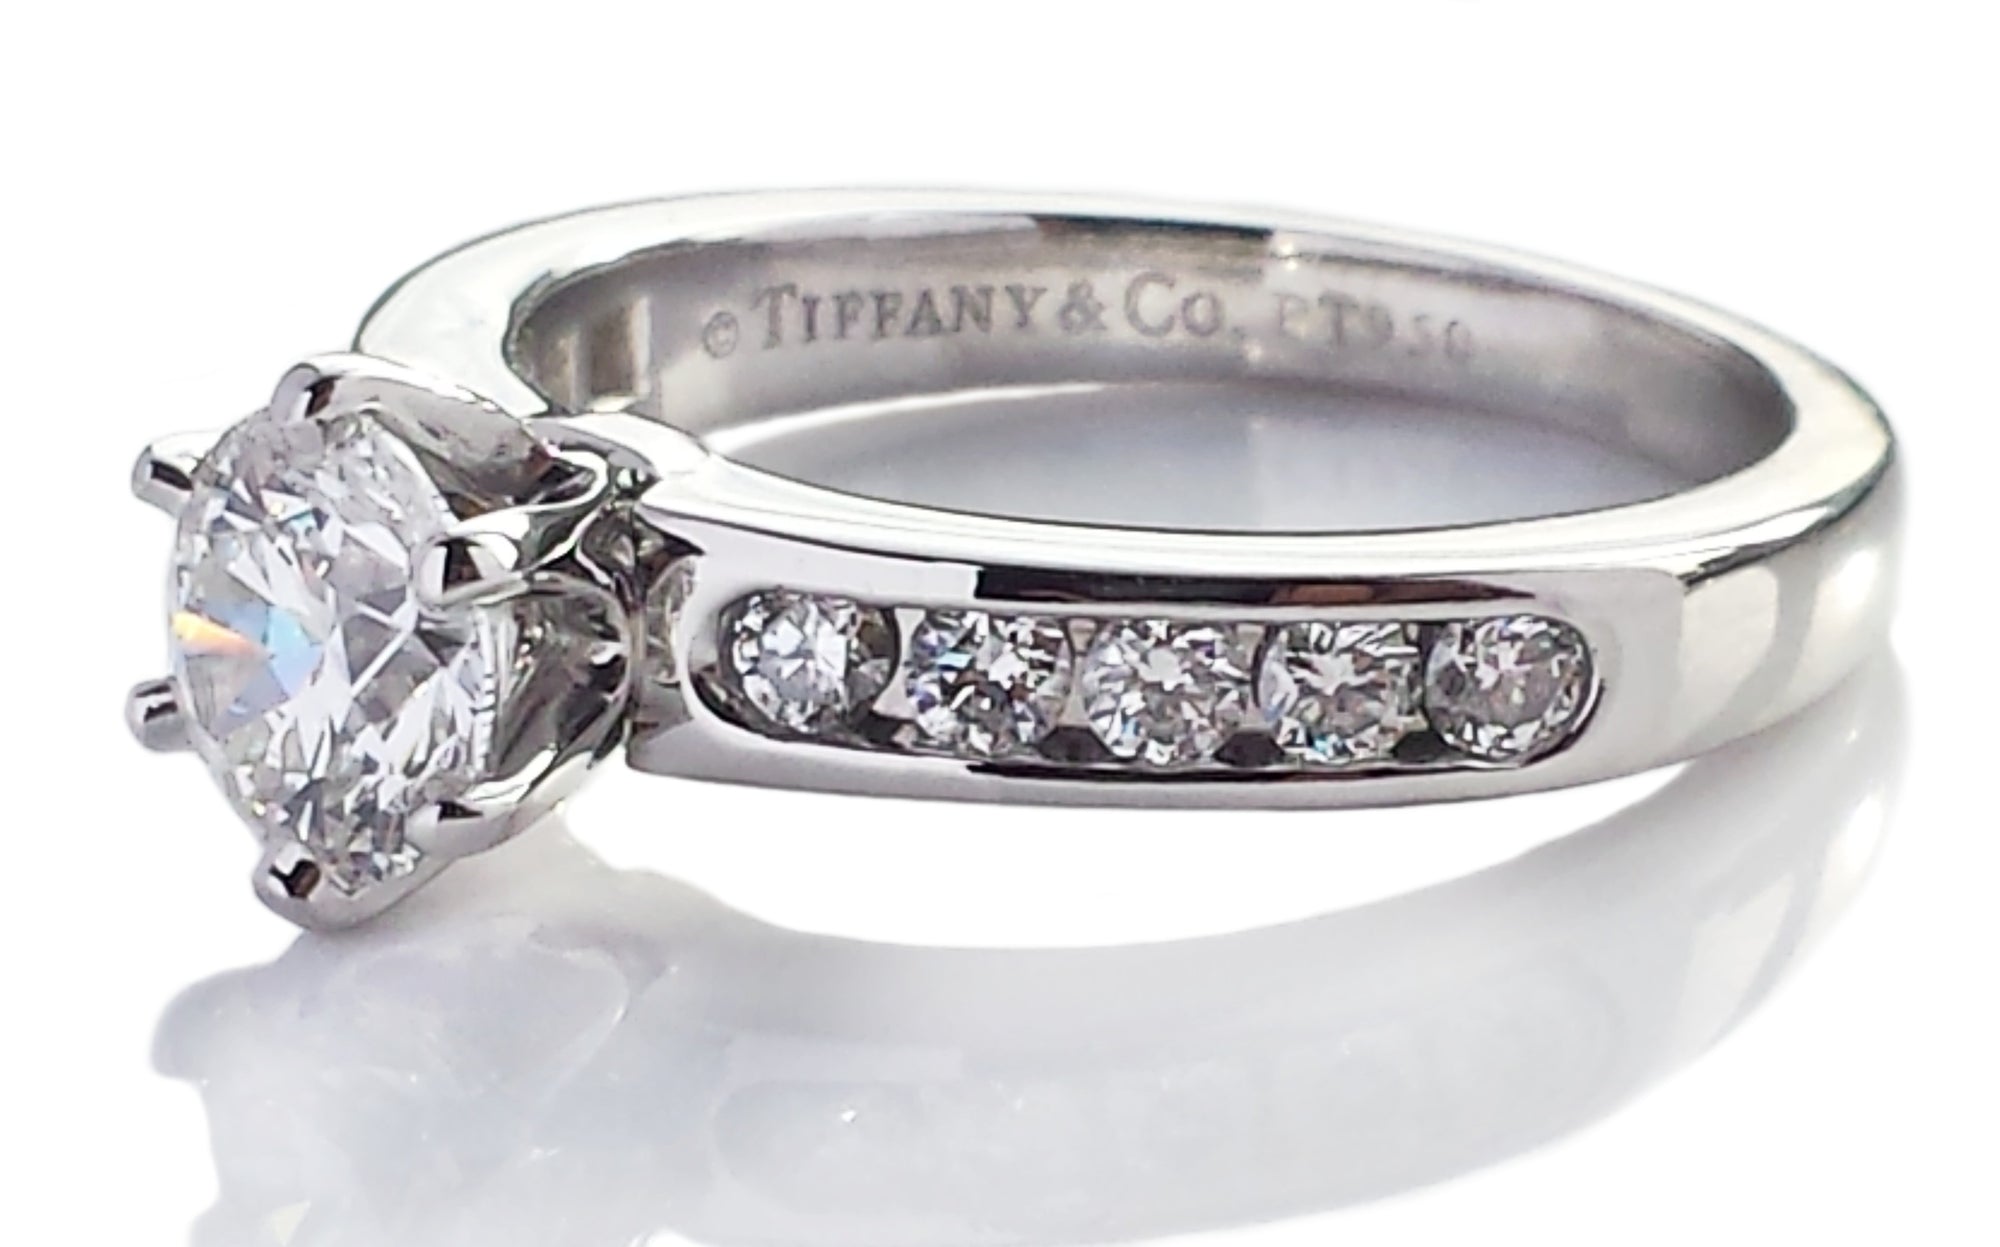 Tiffany & Co. 1.13tcw E/VS1 Round Brilliant Cut Diamond Engagement Ring with Side Stones